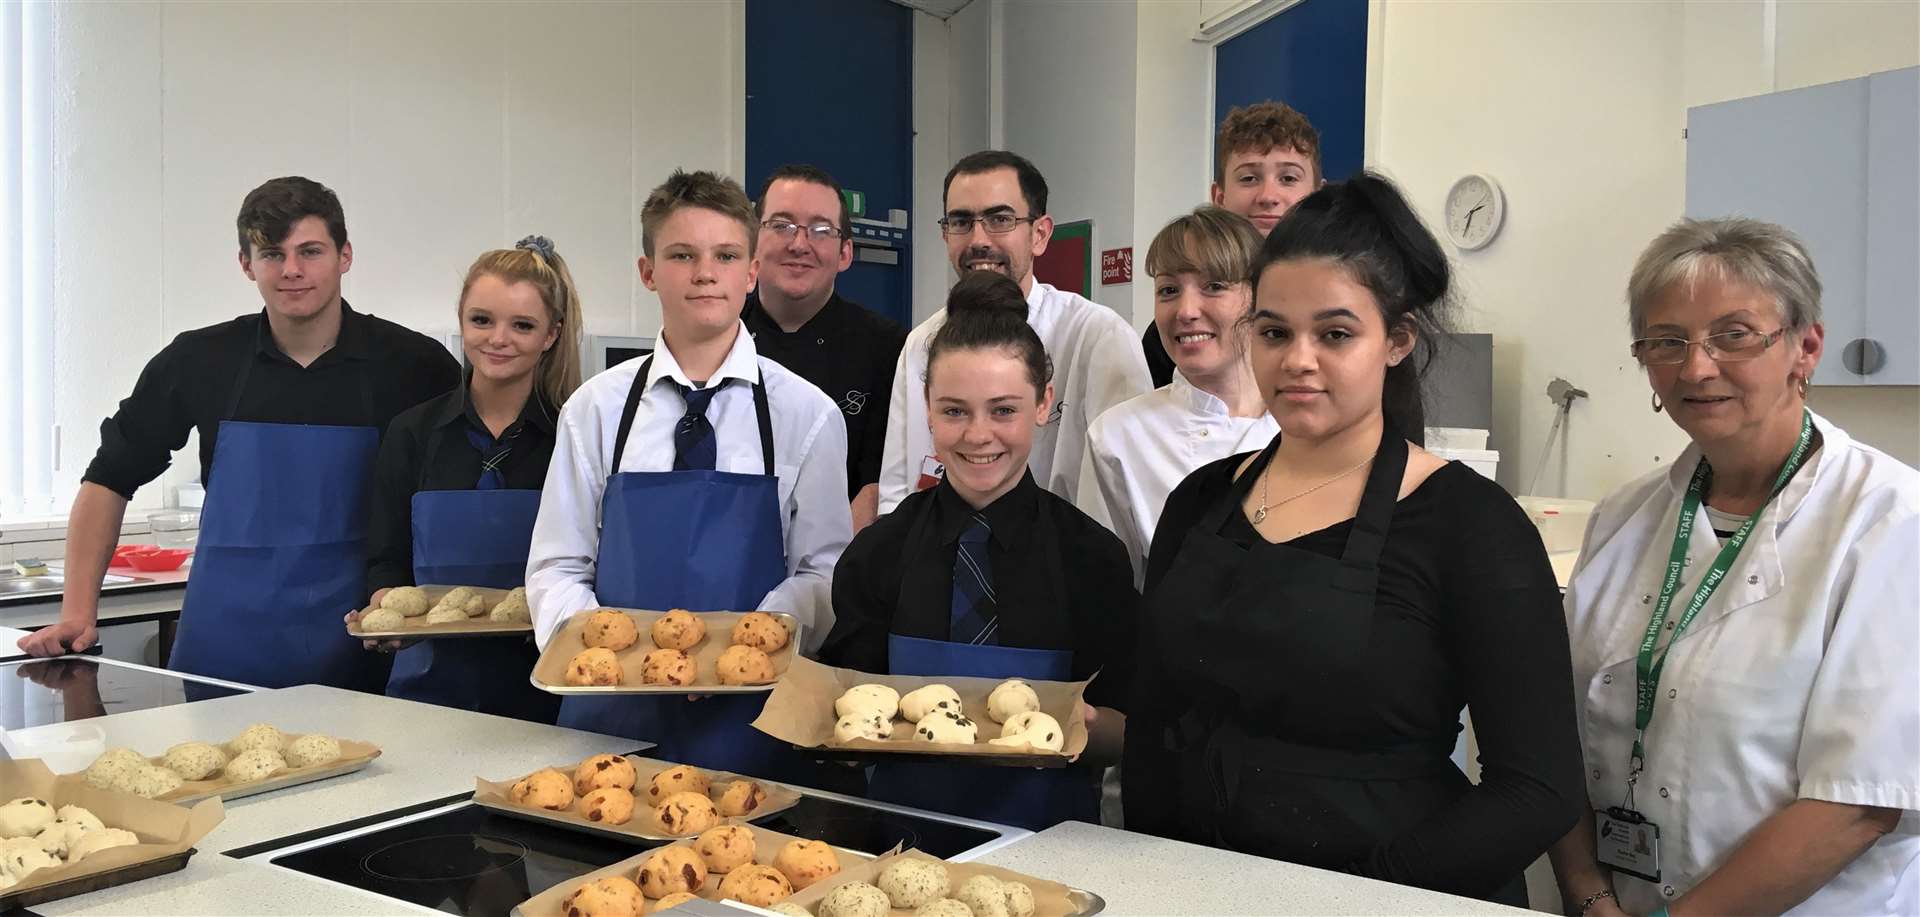 Nairn Academy pupils from the S4, 5 and 6 classes working with the Sun Dancer restaurant fully prepped and served the meal at a Gala Dinner, the launch of the Nairn Book & Arts Festival.